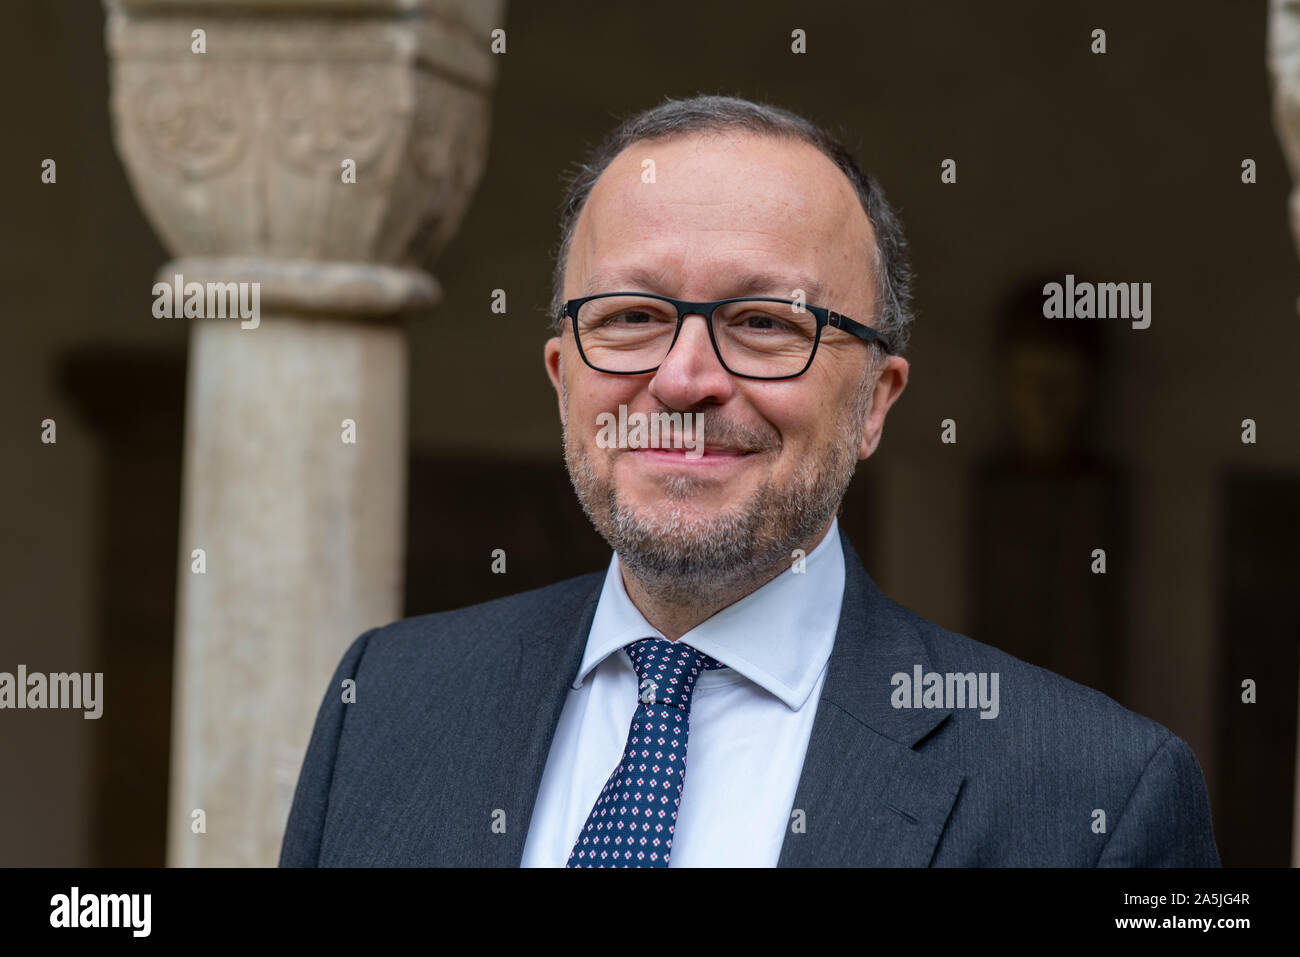 Dr. Jonathan Williams, Vice Director of the Bristish Museum in London, stands in the monastery Unser Lieben Frauen in Magdeburg, Germany. He has signe Stock Photo